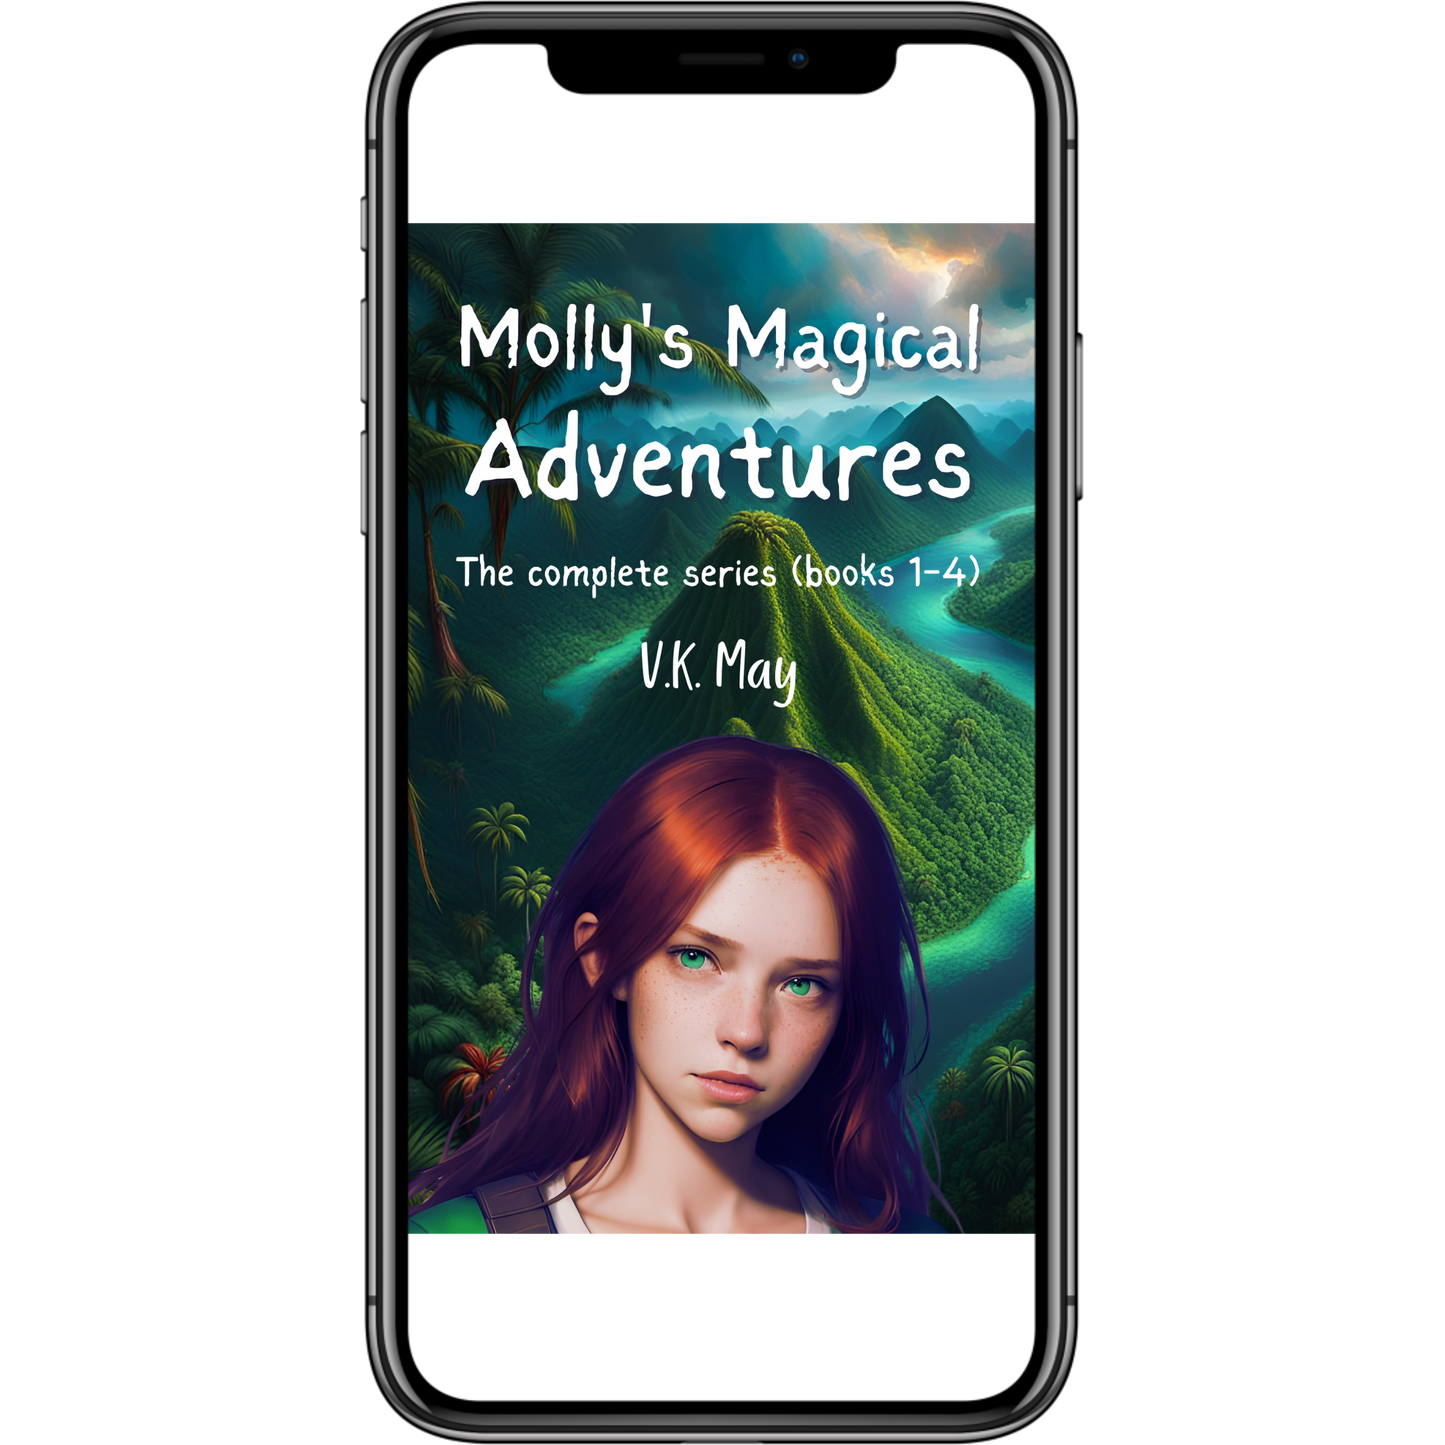 Molly's Magical Adventures: The complete series (books 1-4)